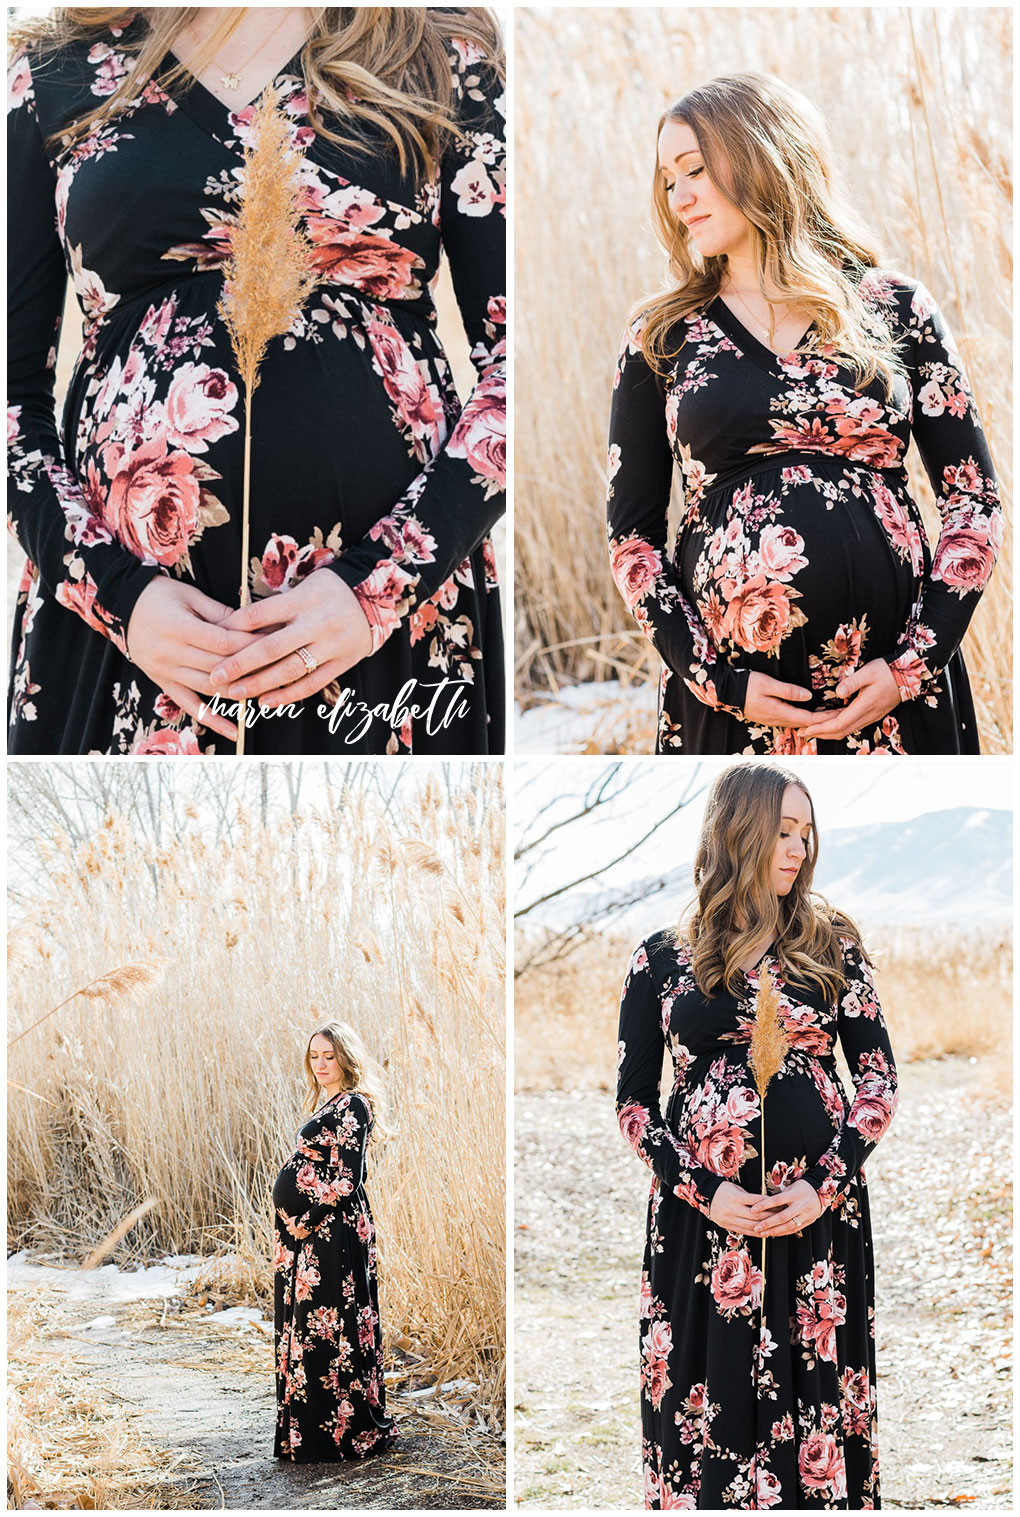 Say Yes to a Maternity Session